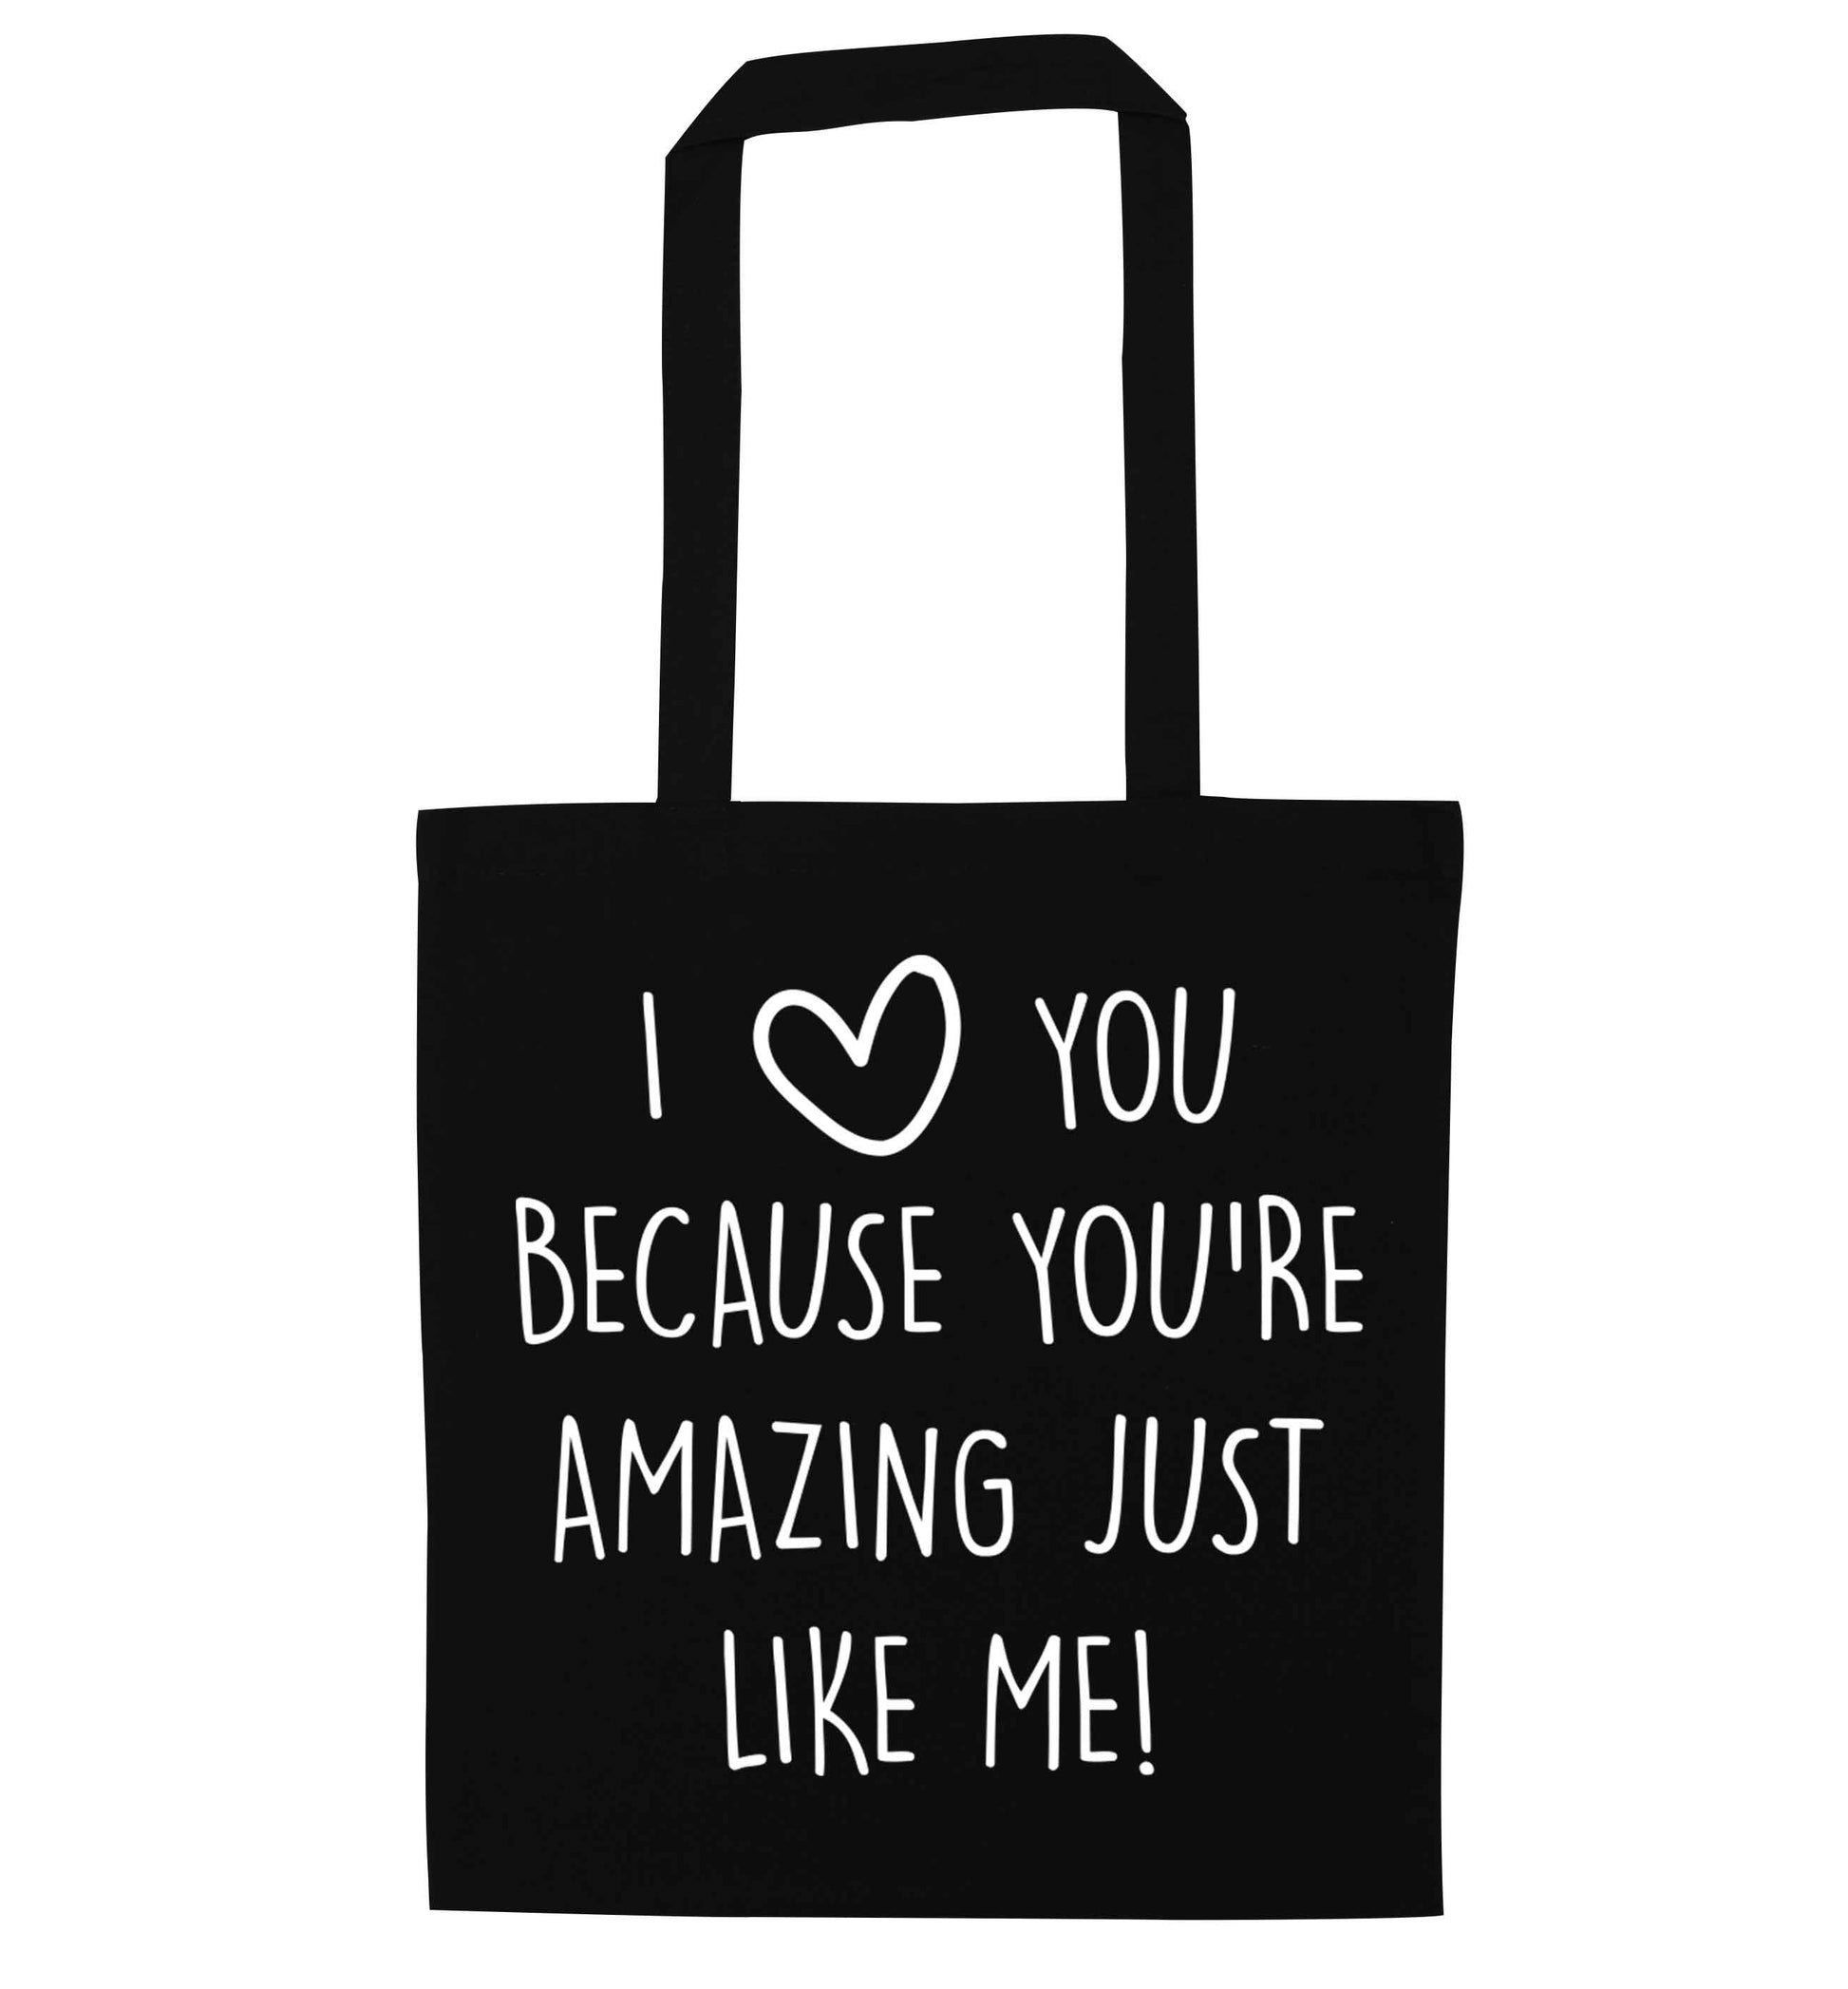 I love you because you're amazing just like me black tote bag